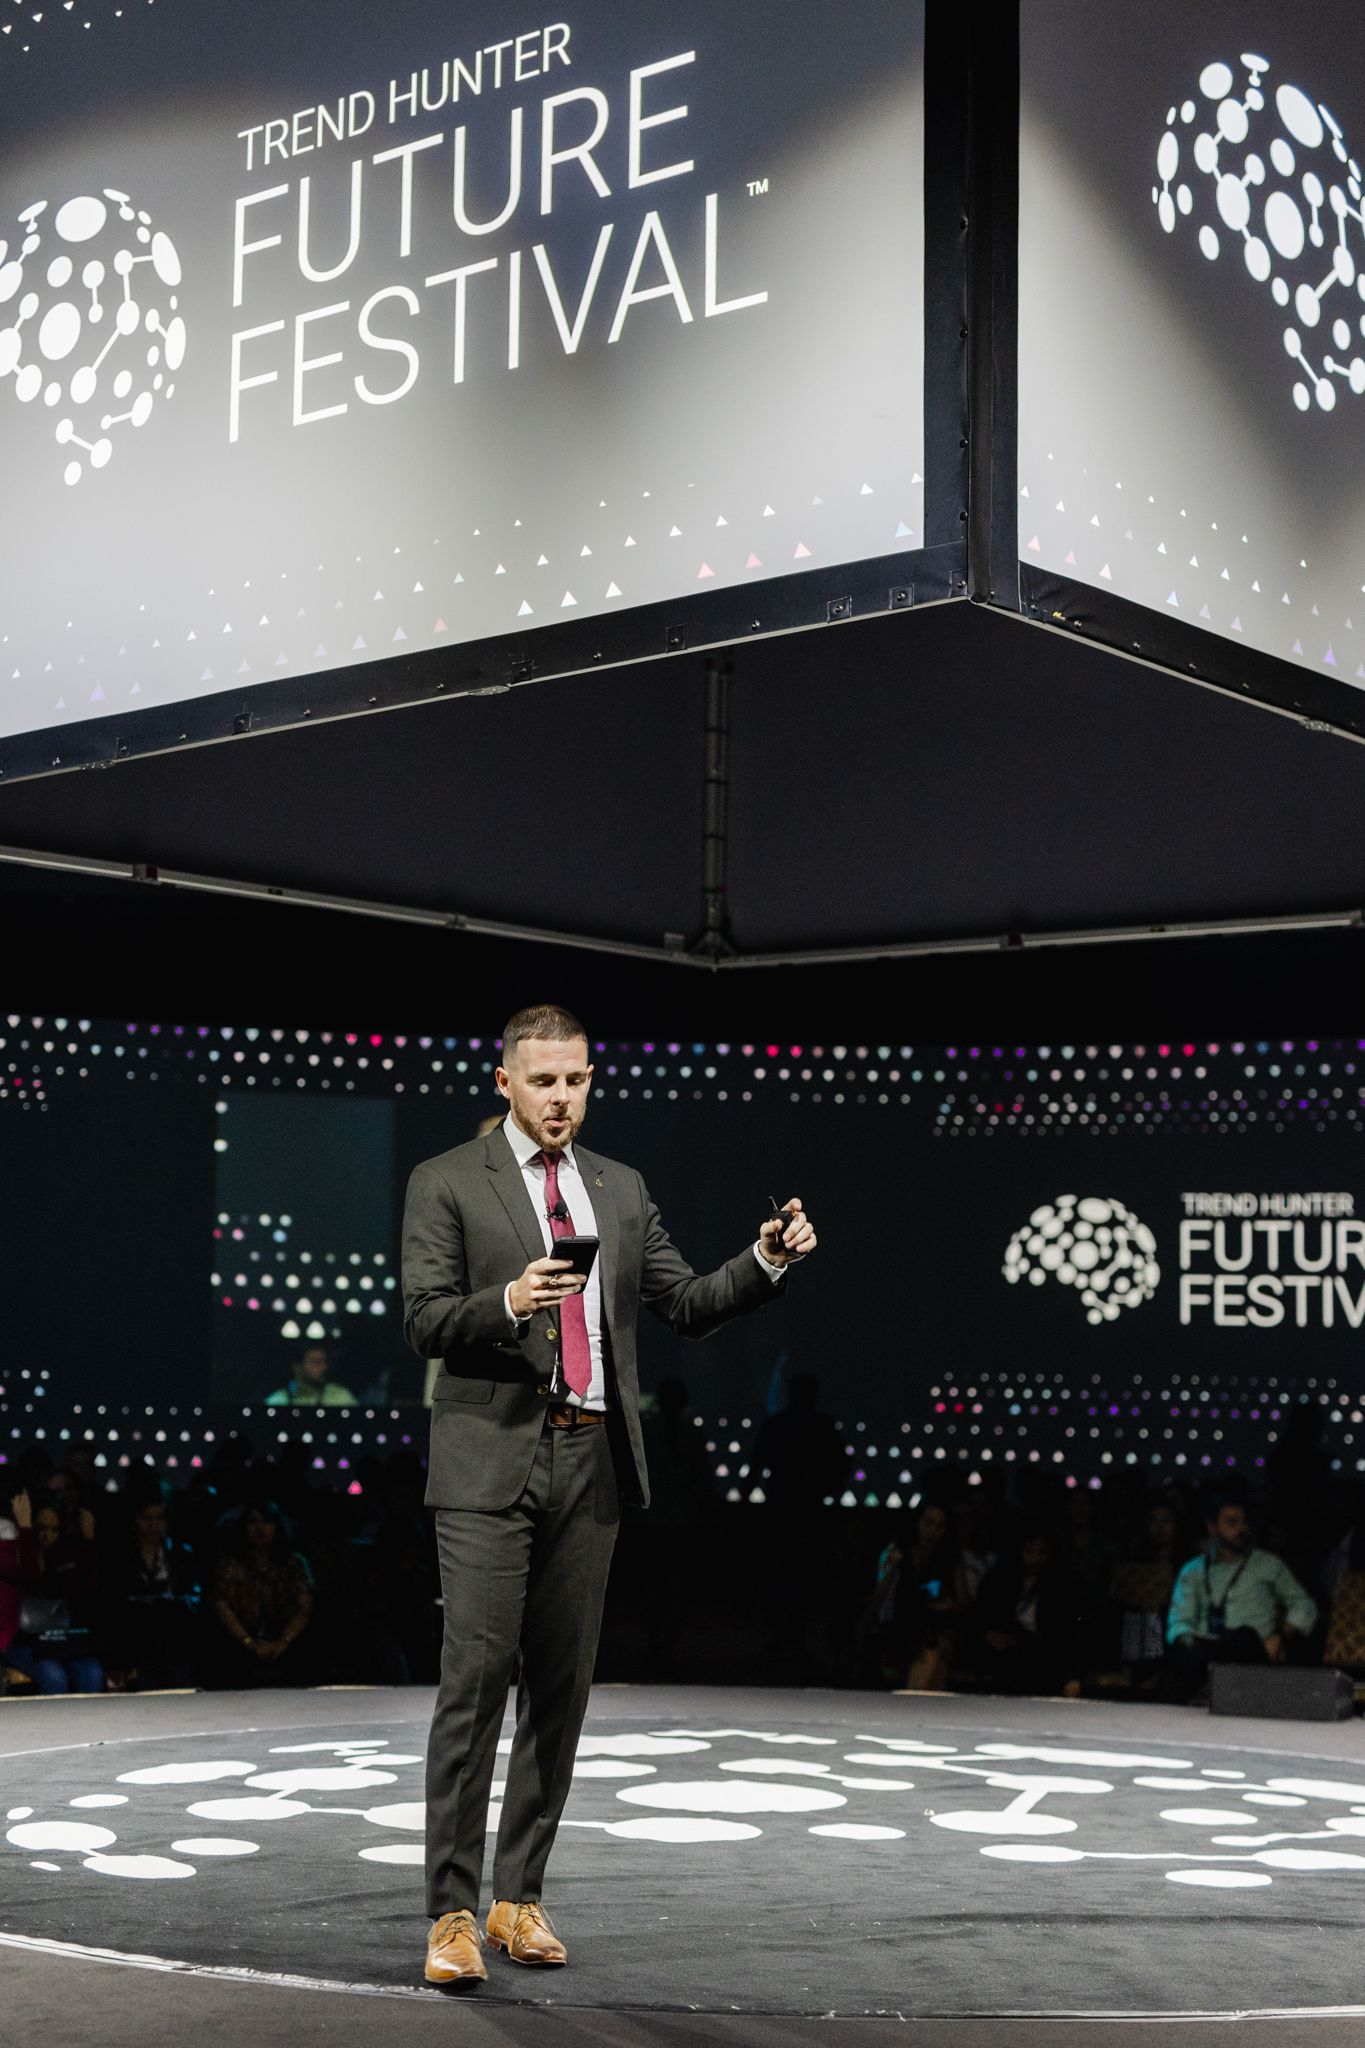 An event photographer capturing a man in a suit on stage at the future festival.